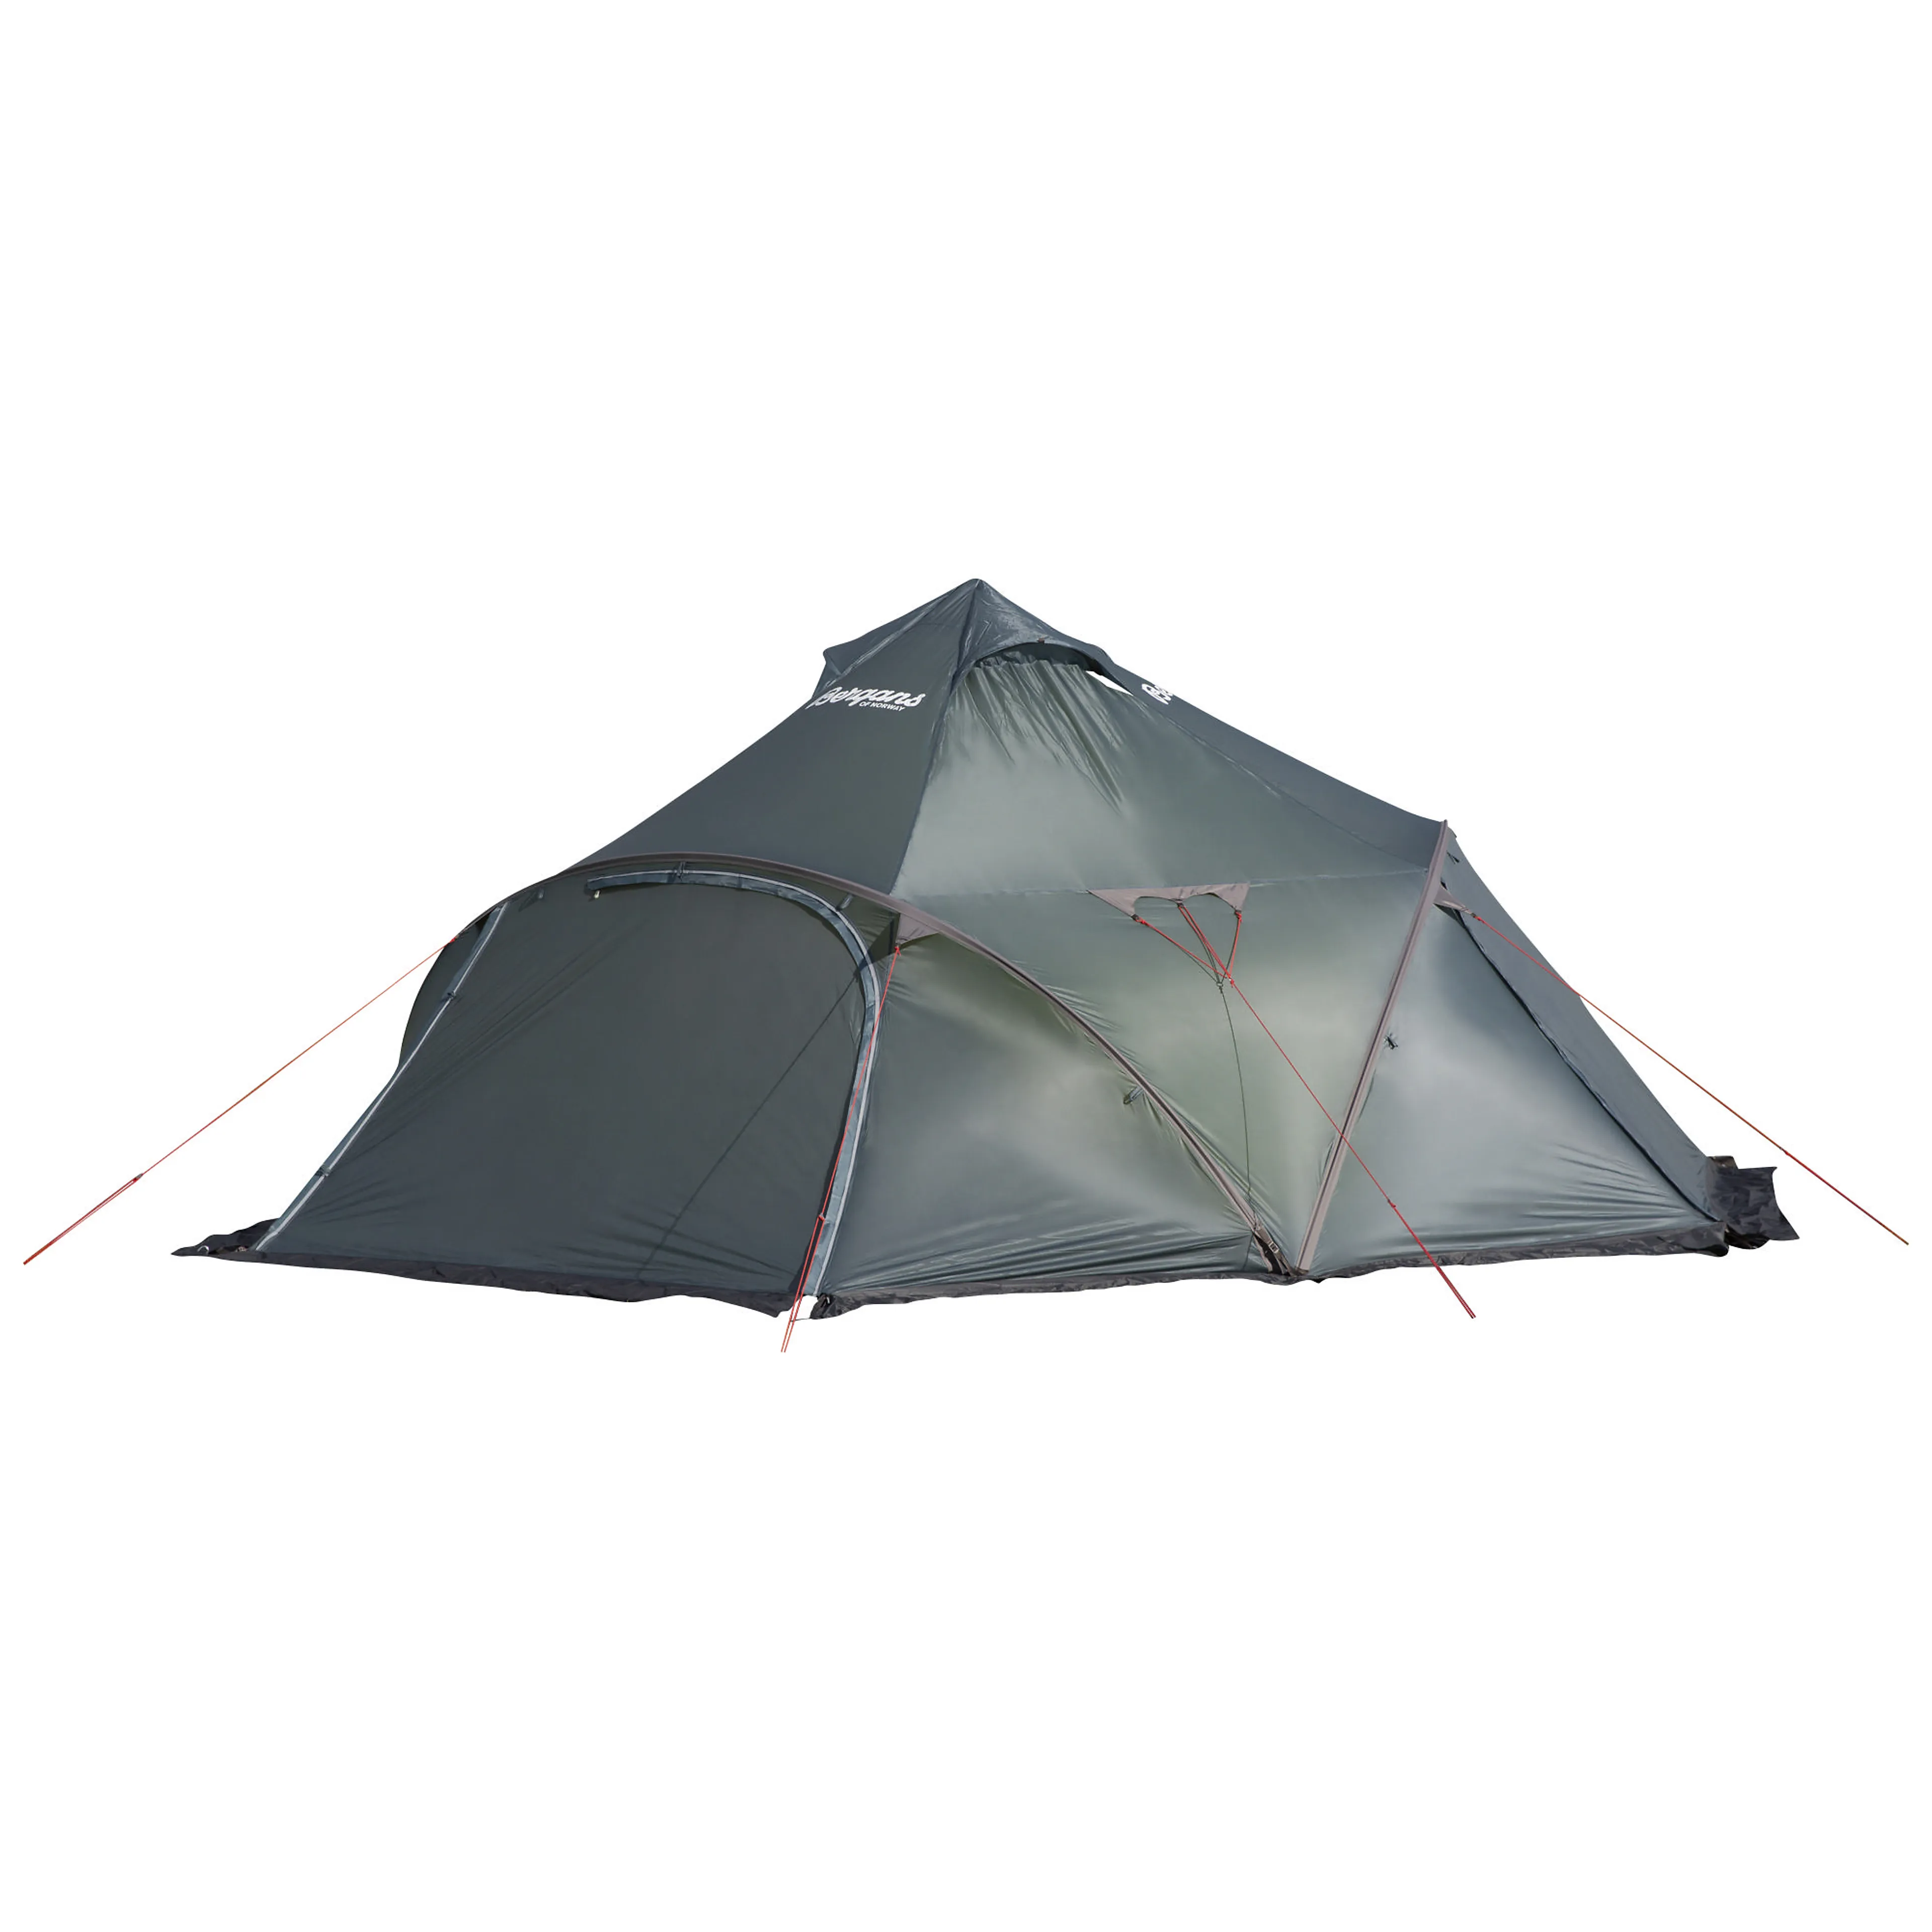 Wiglo® LT 6-Pers Tent